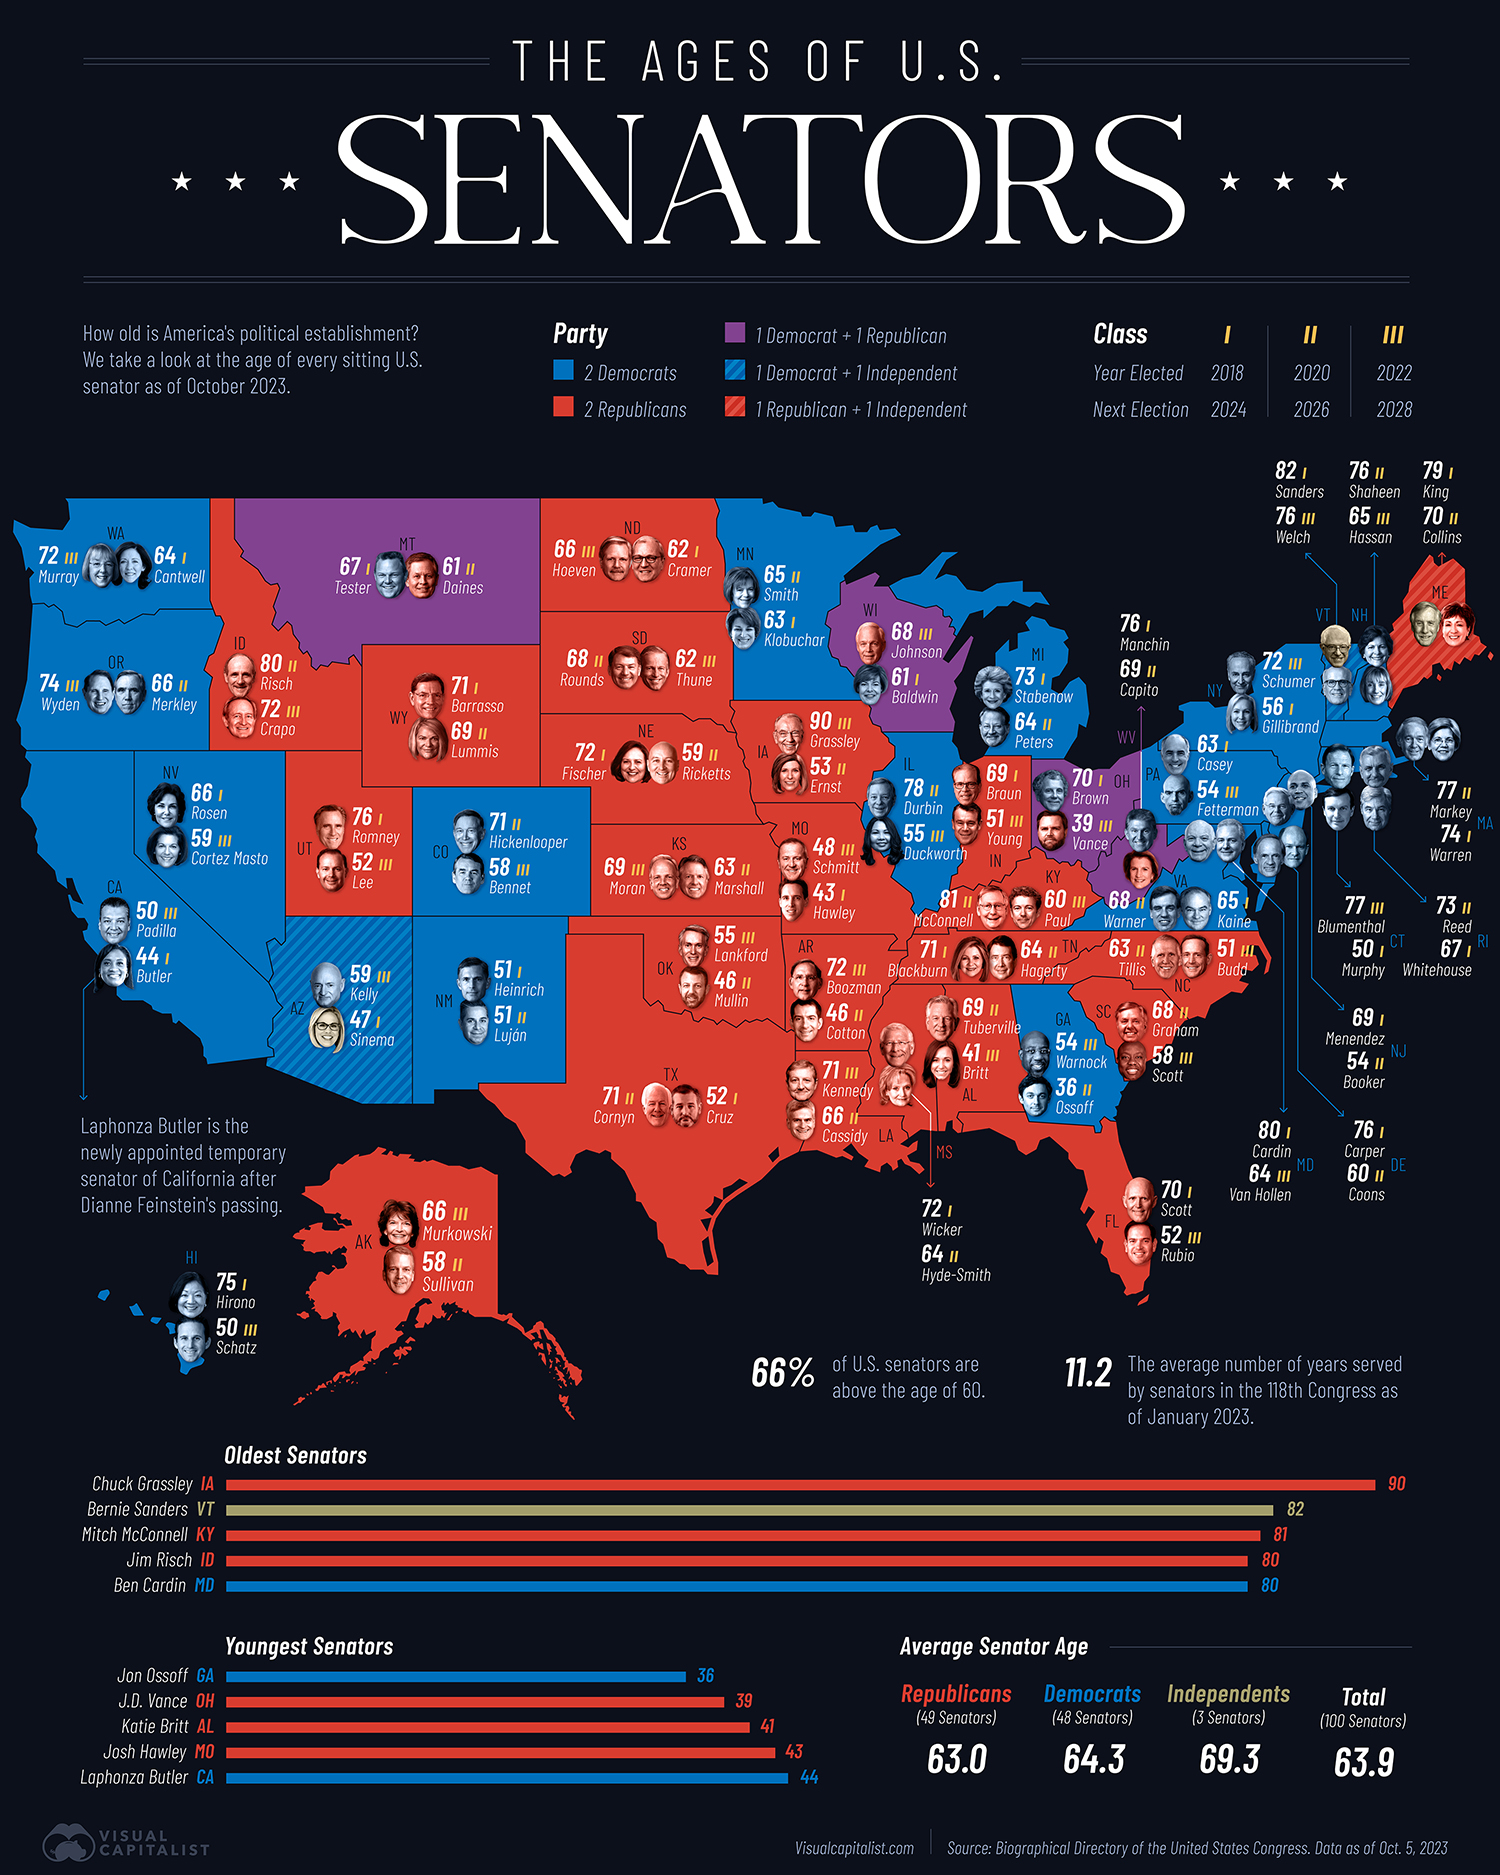 Mapped: The Age of U.S. Senators, by State